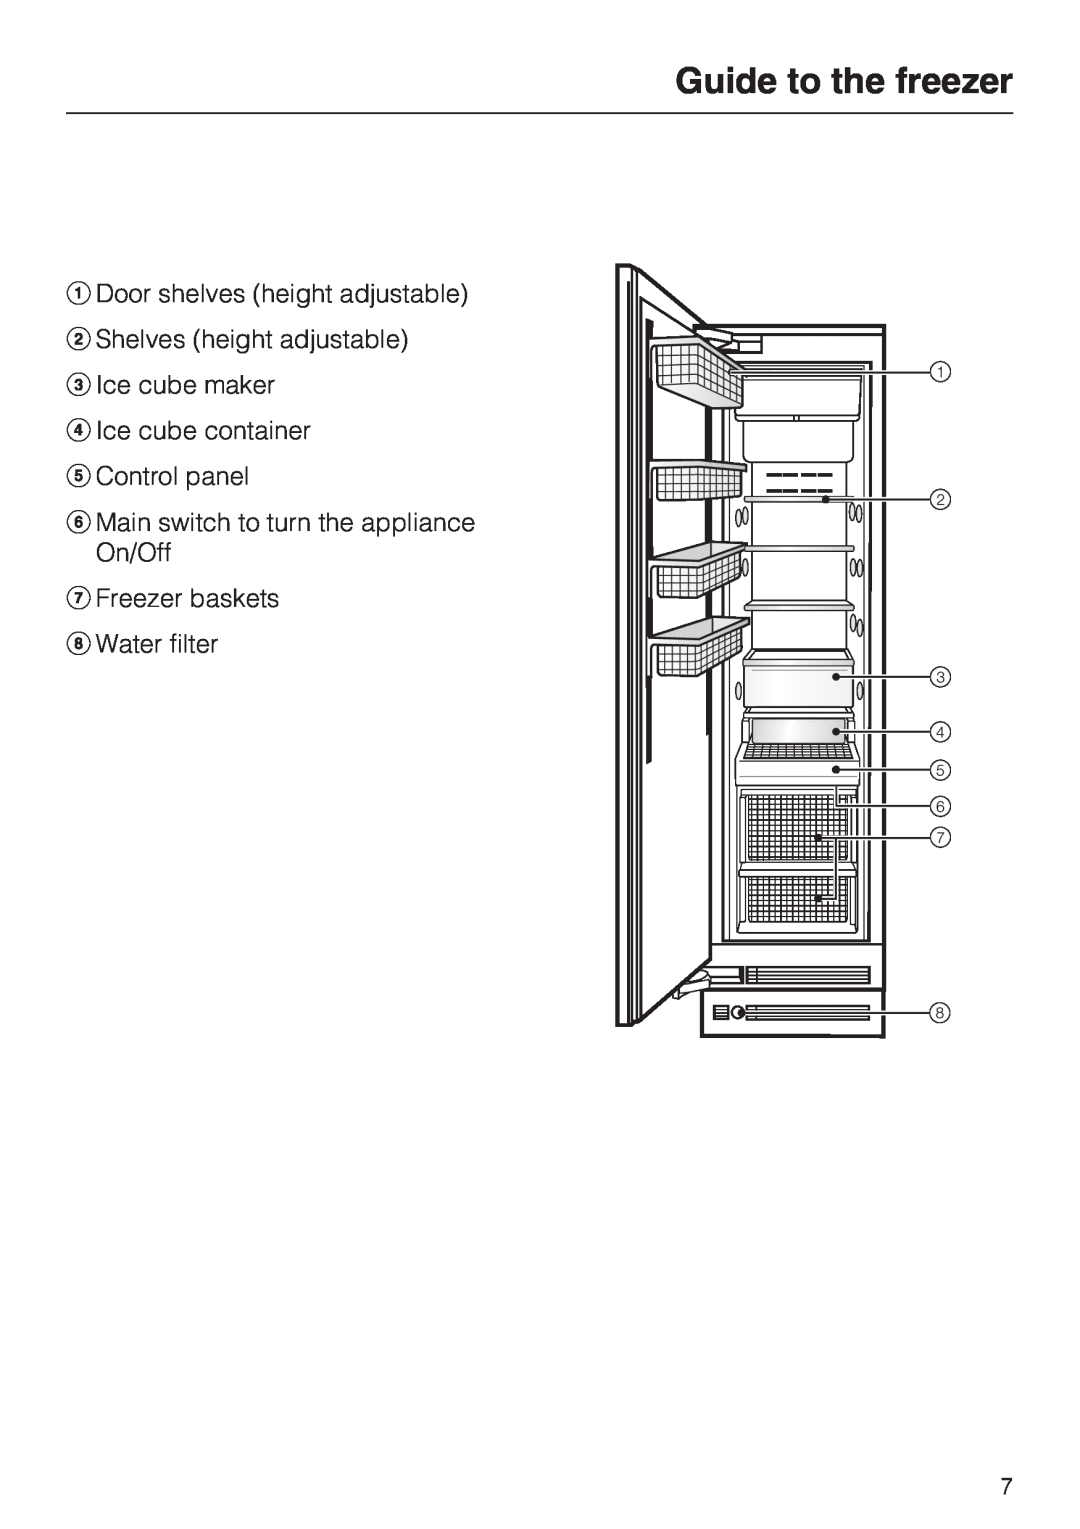 Miele F1411VI Guide to the freezer, a Door shelves height adjustable, b Shelves height adjustable c Ice cube maker 